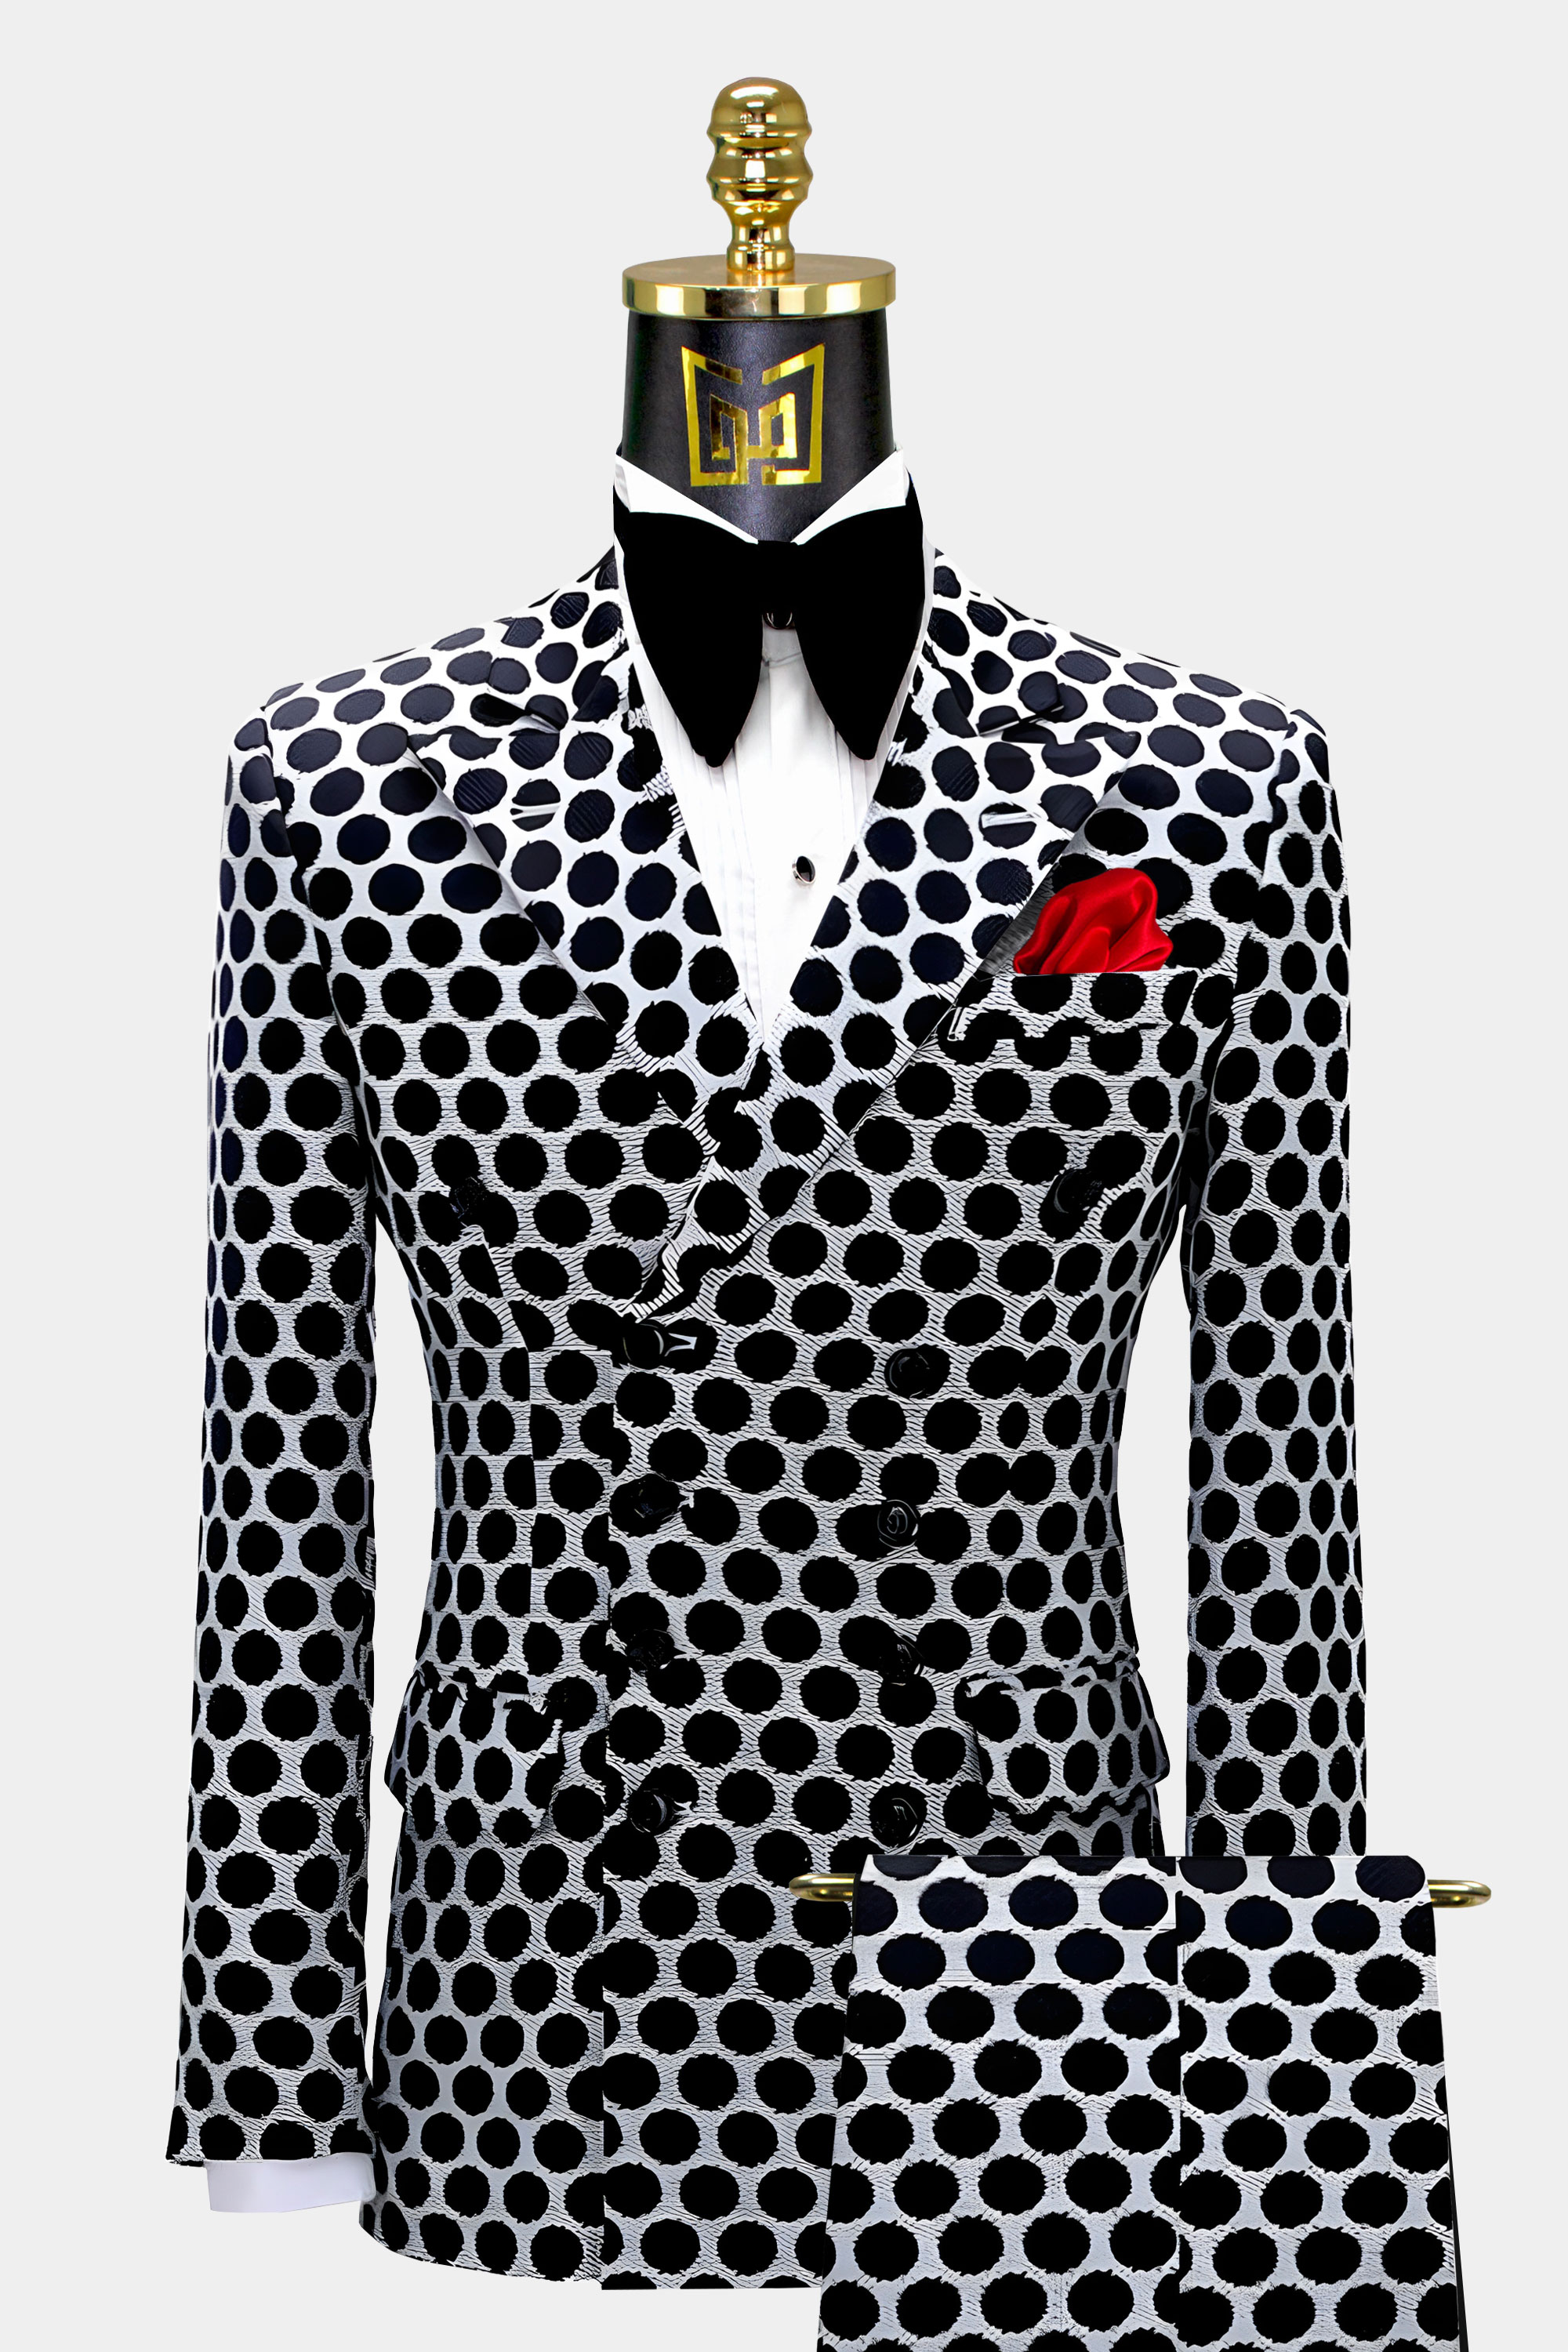 Black&White Houndstooth Men's Wedding Tuxedos 3 Pieces Suits Party Slim Custom 